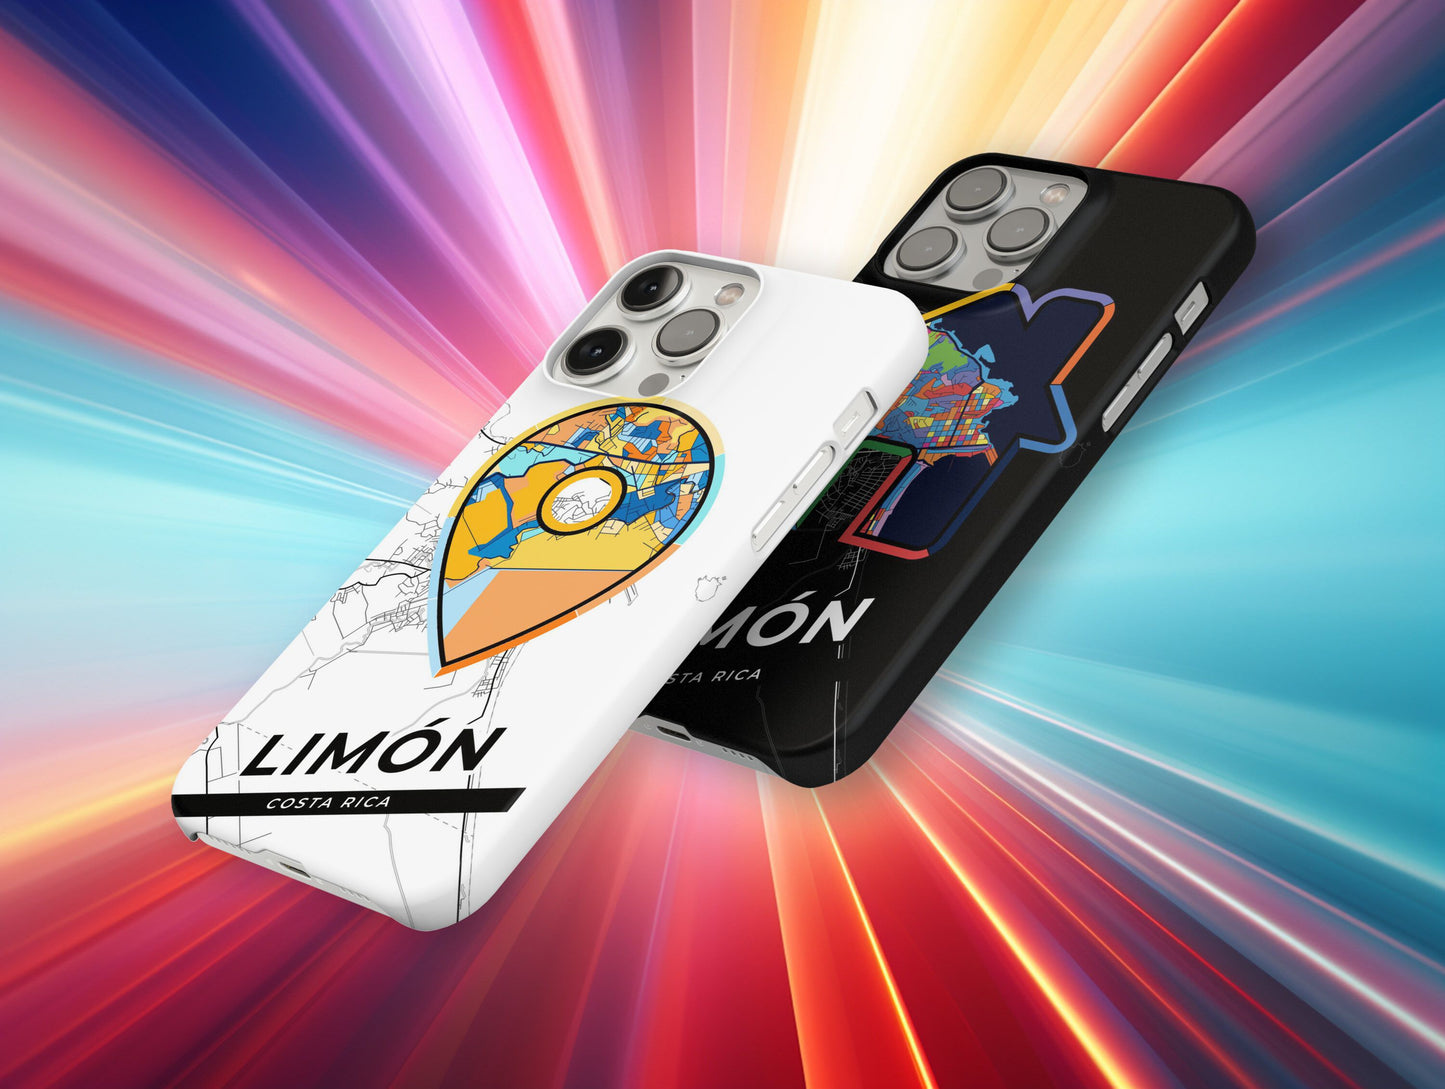 Limón Costa Rica slim phone case with colorful icon. Birthday, wedding or housewarming gift. Couple match cases.